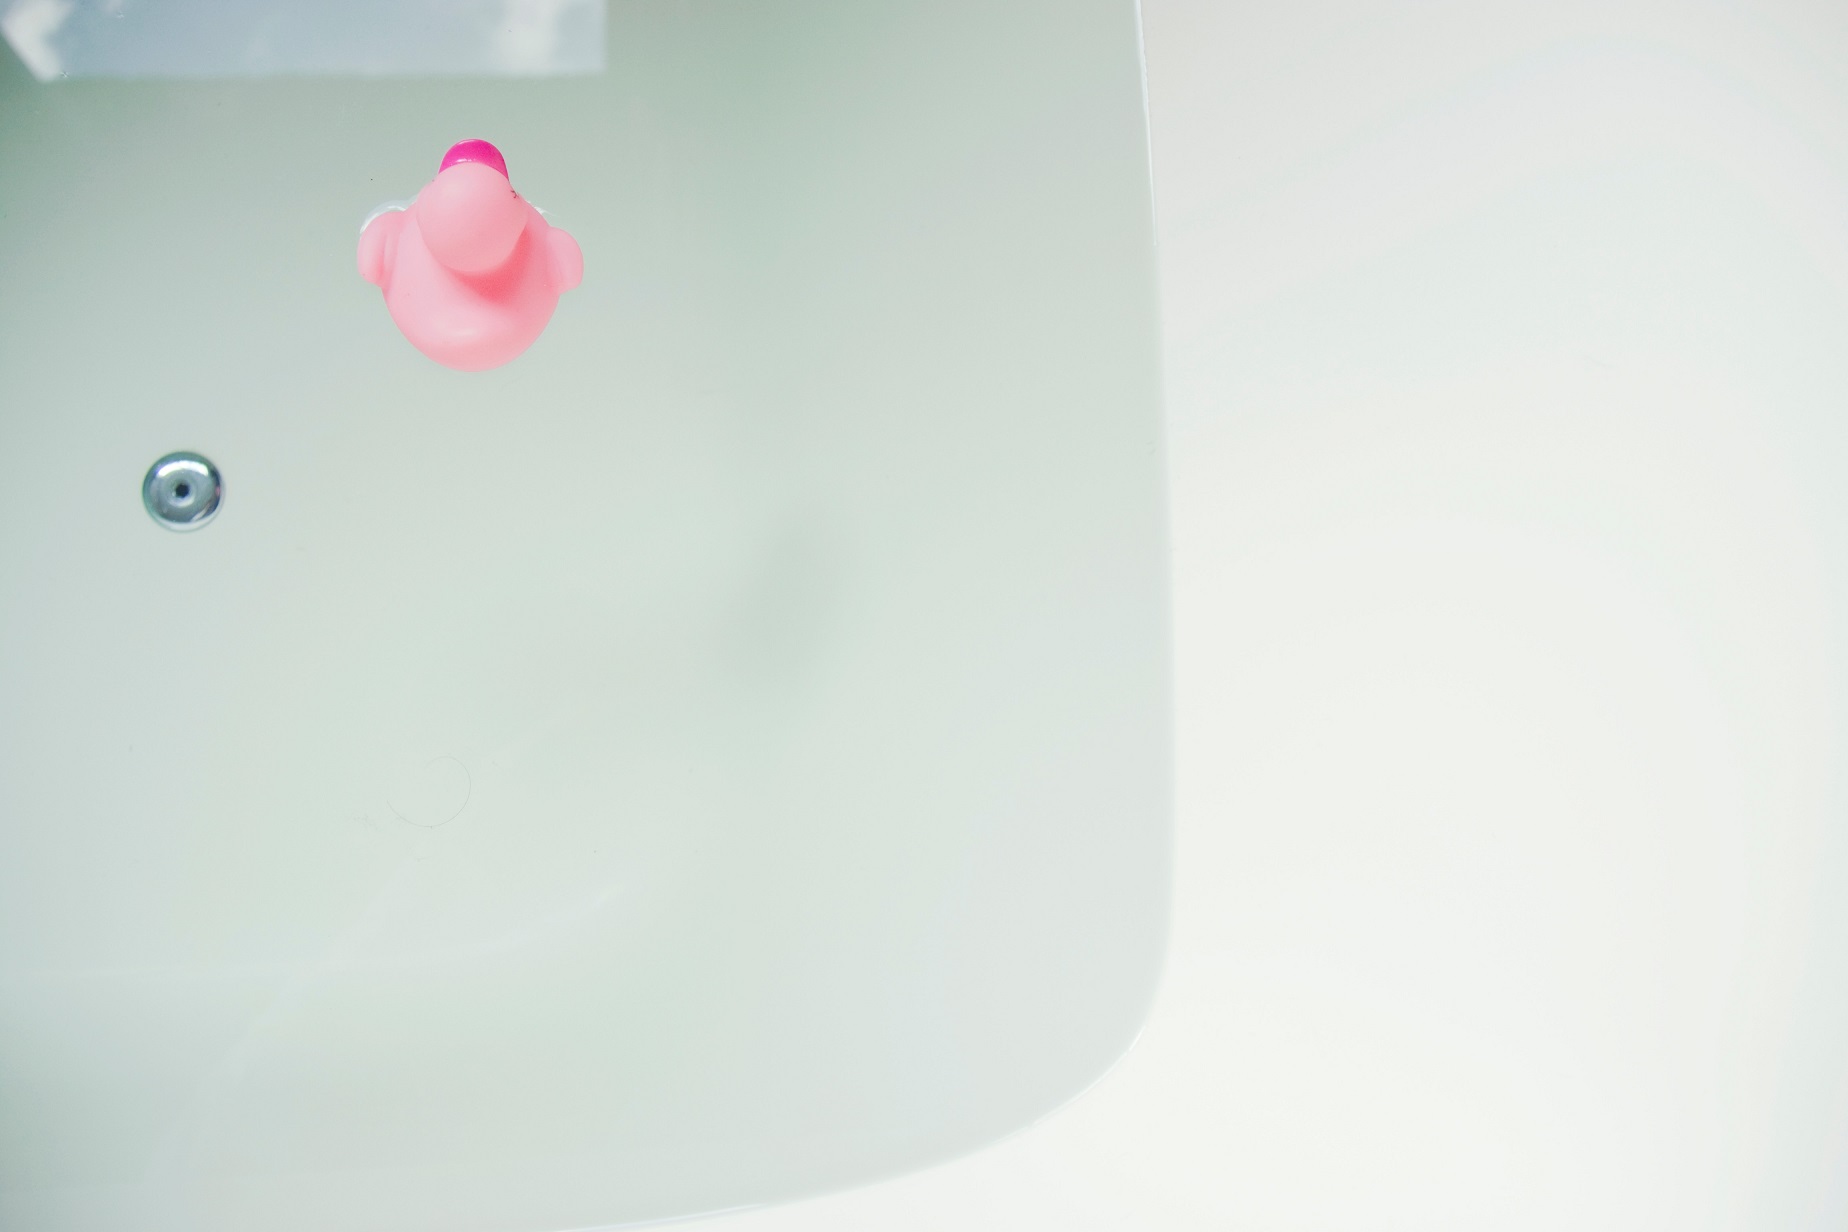 Bath with water and pink rubber duck - for an article to learn about giving a sensory sensitive child a bath